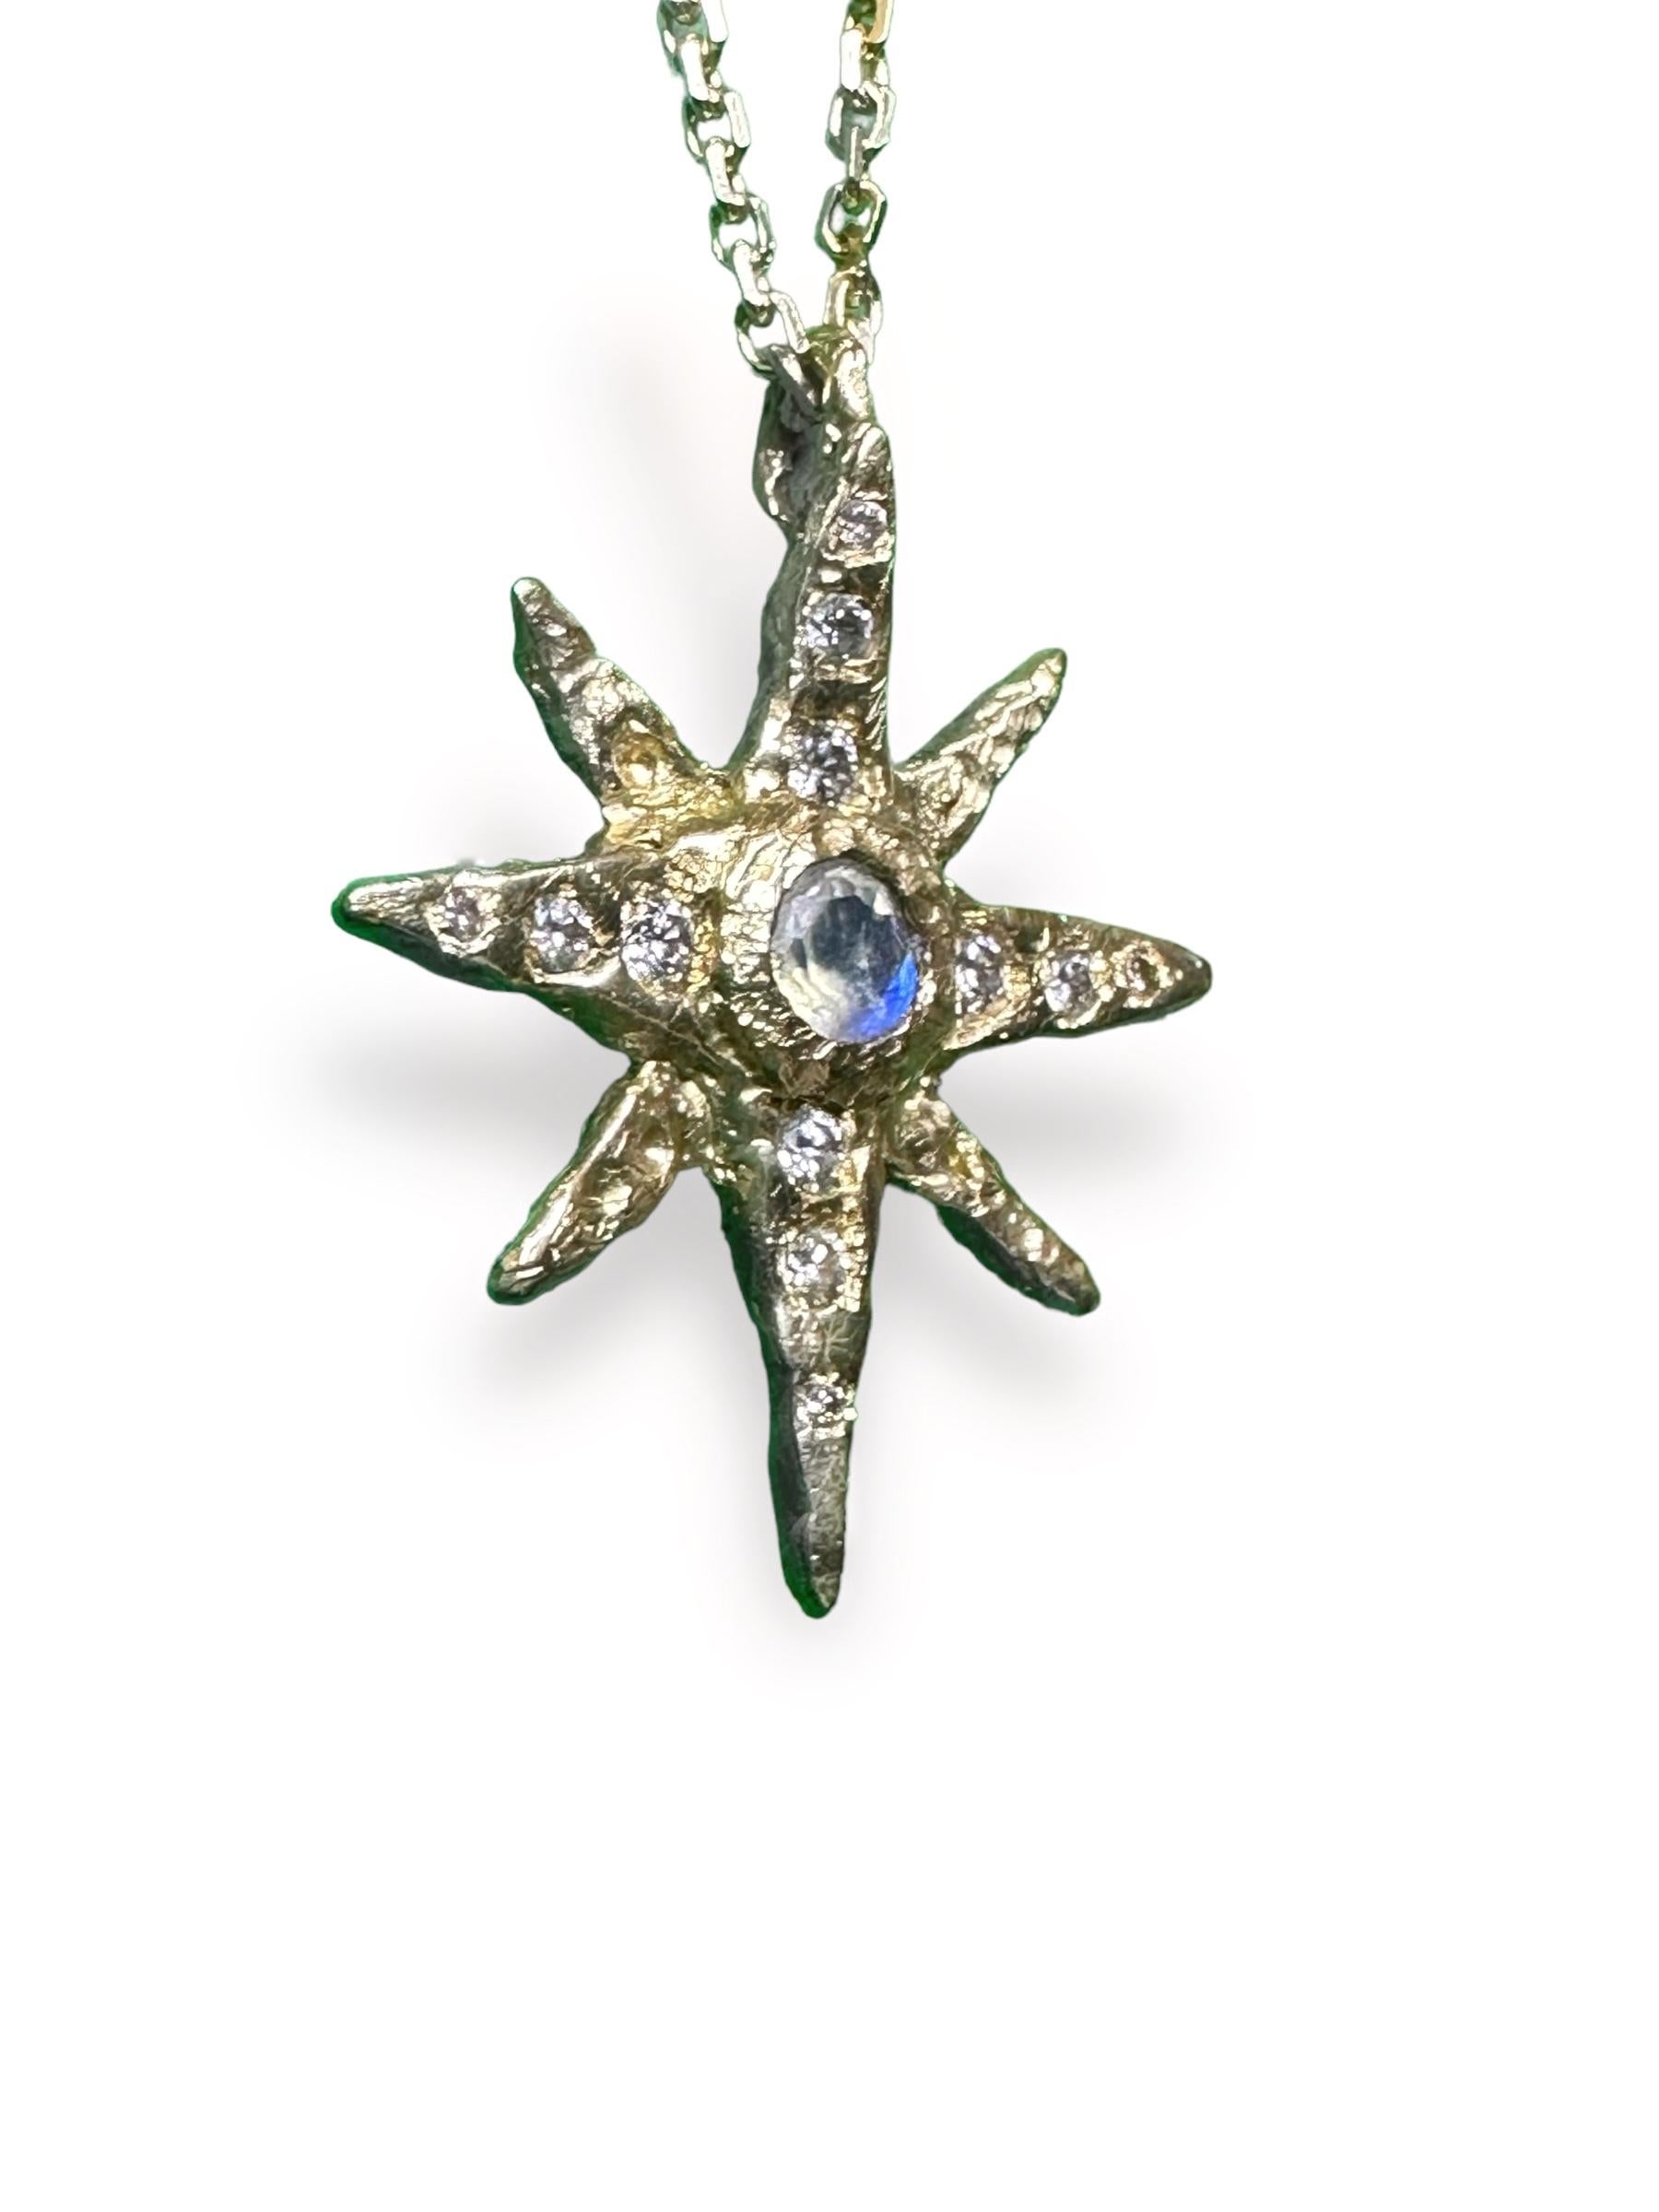 Indulge in the beauty and symbolism of the Northern Star with this stunning one-of-a-kind necklace. Crafted in 18K yellow gold, this necklace features a breathtaking rainbow moonstone at its center and adorned with sparkling diamonds, making it